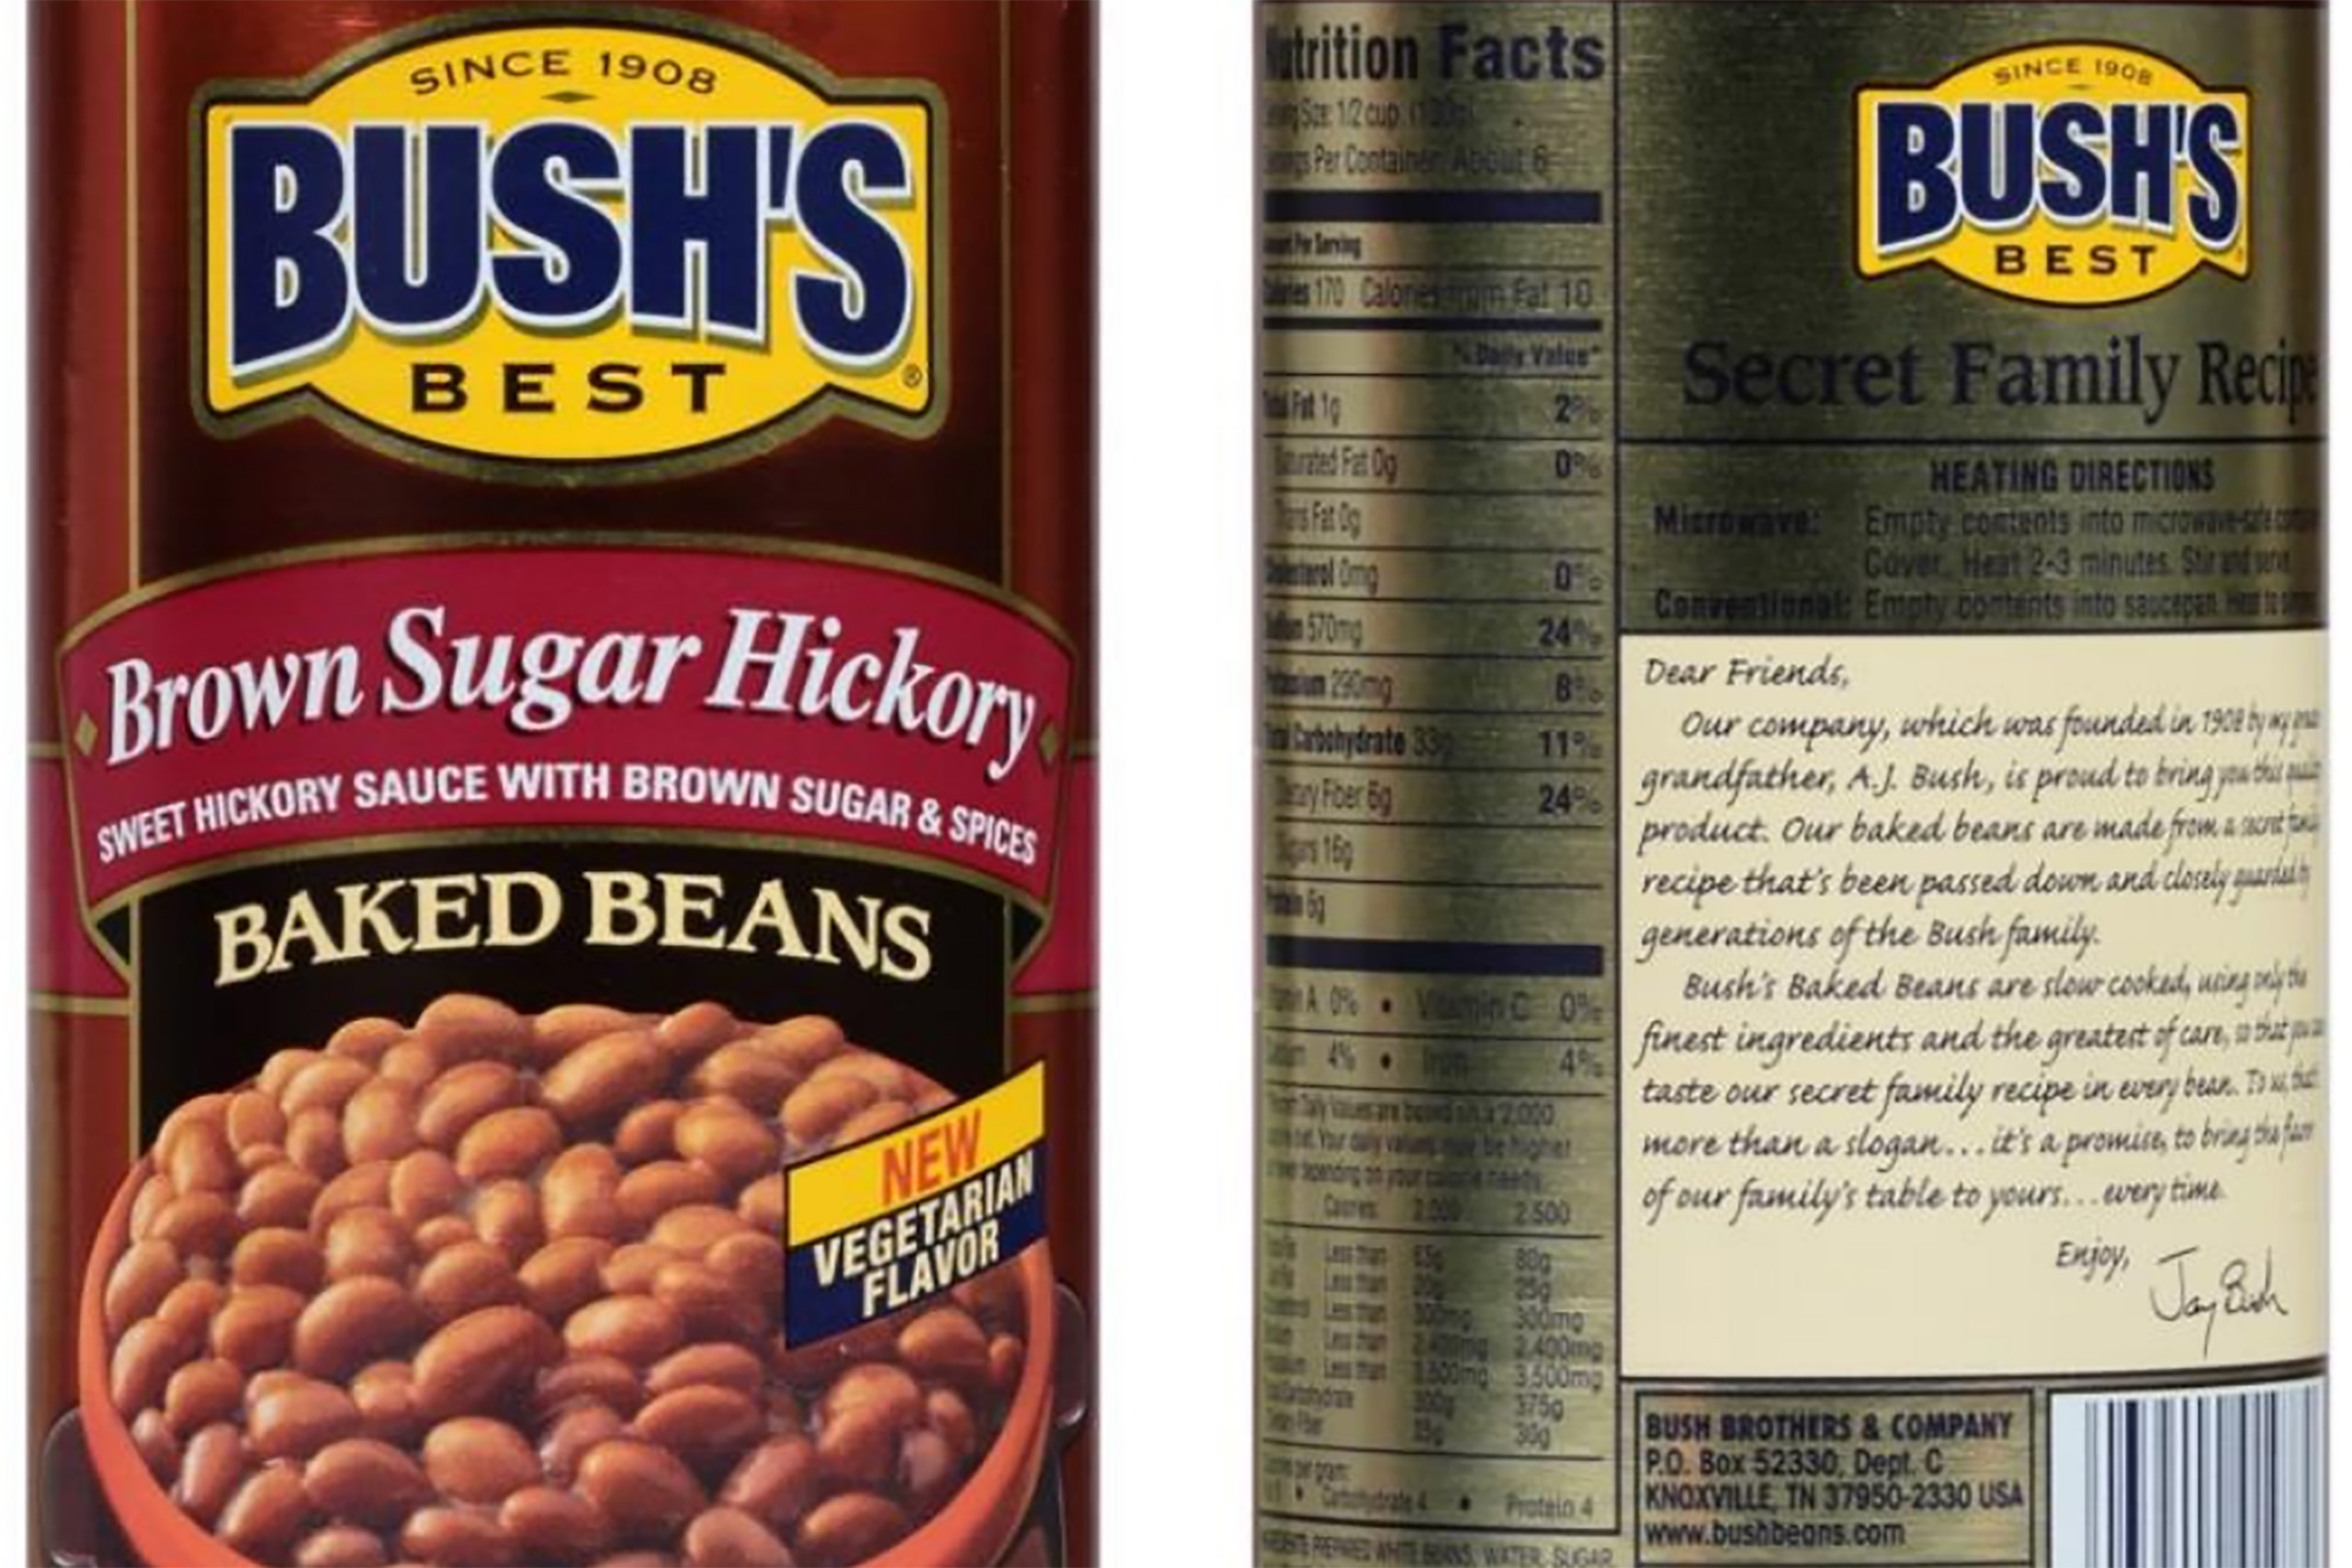 Bush Brothers Recalls Three Types of Baked Beans